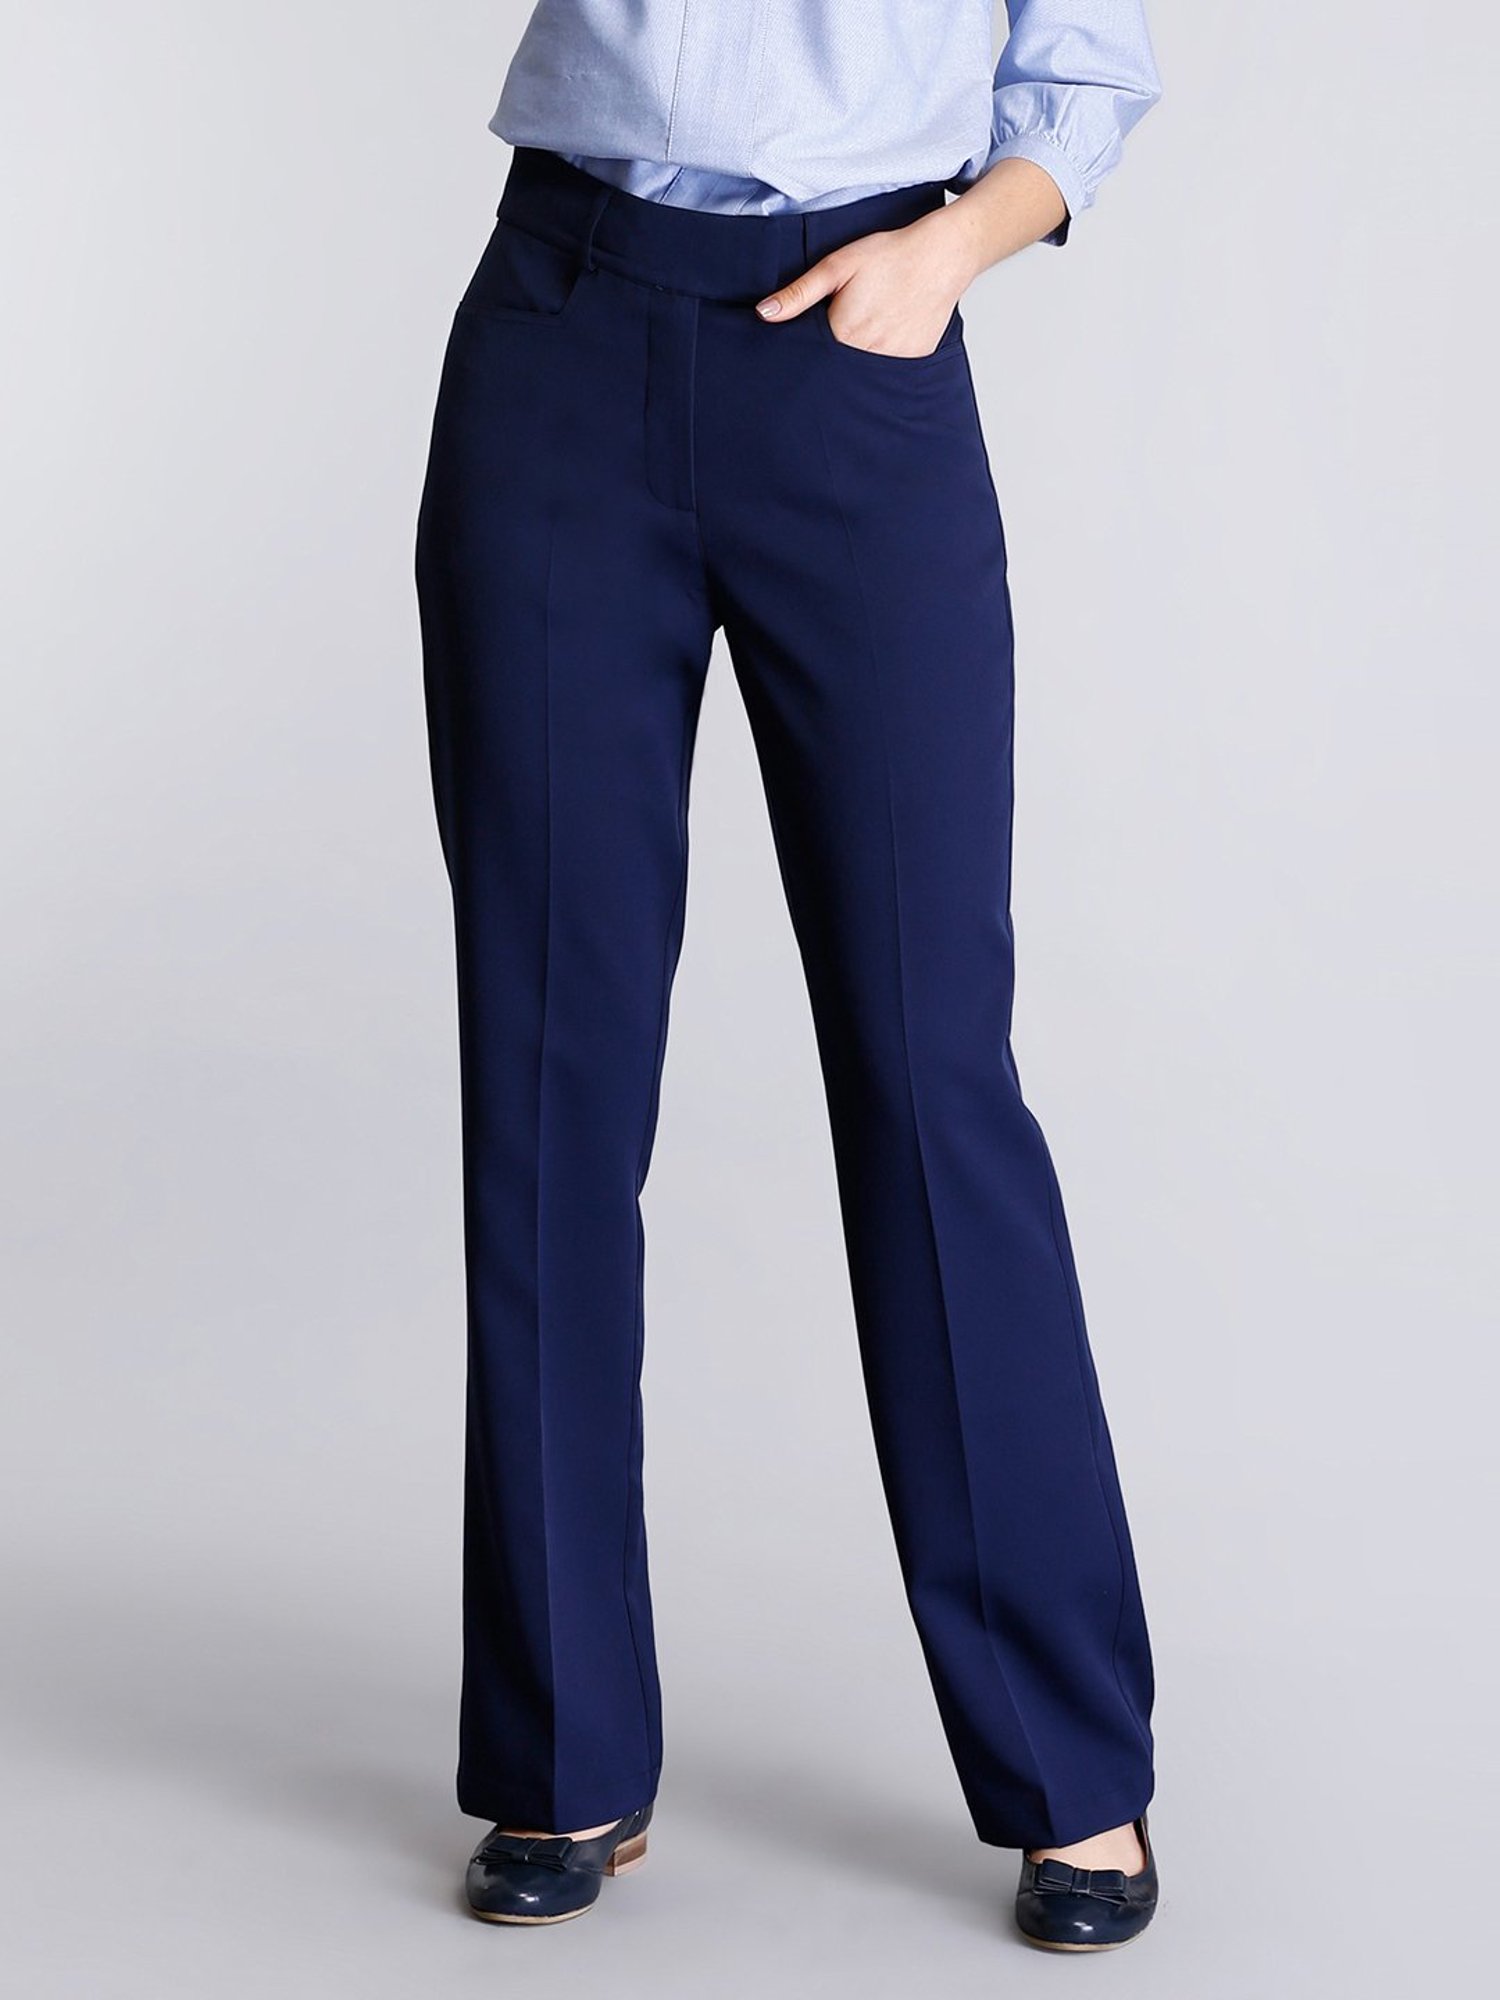 Black trouser pants for womens and girls for casual and formal wear